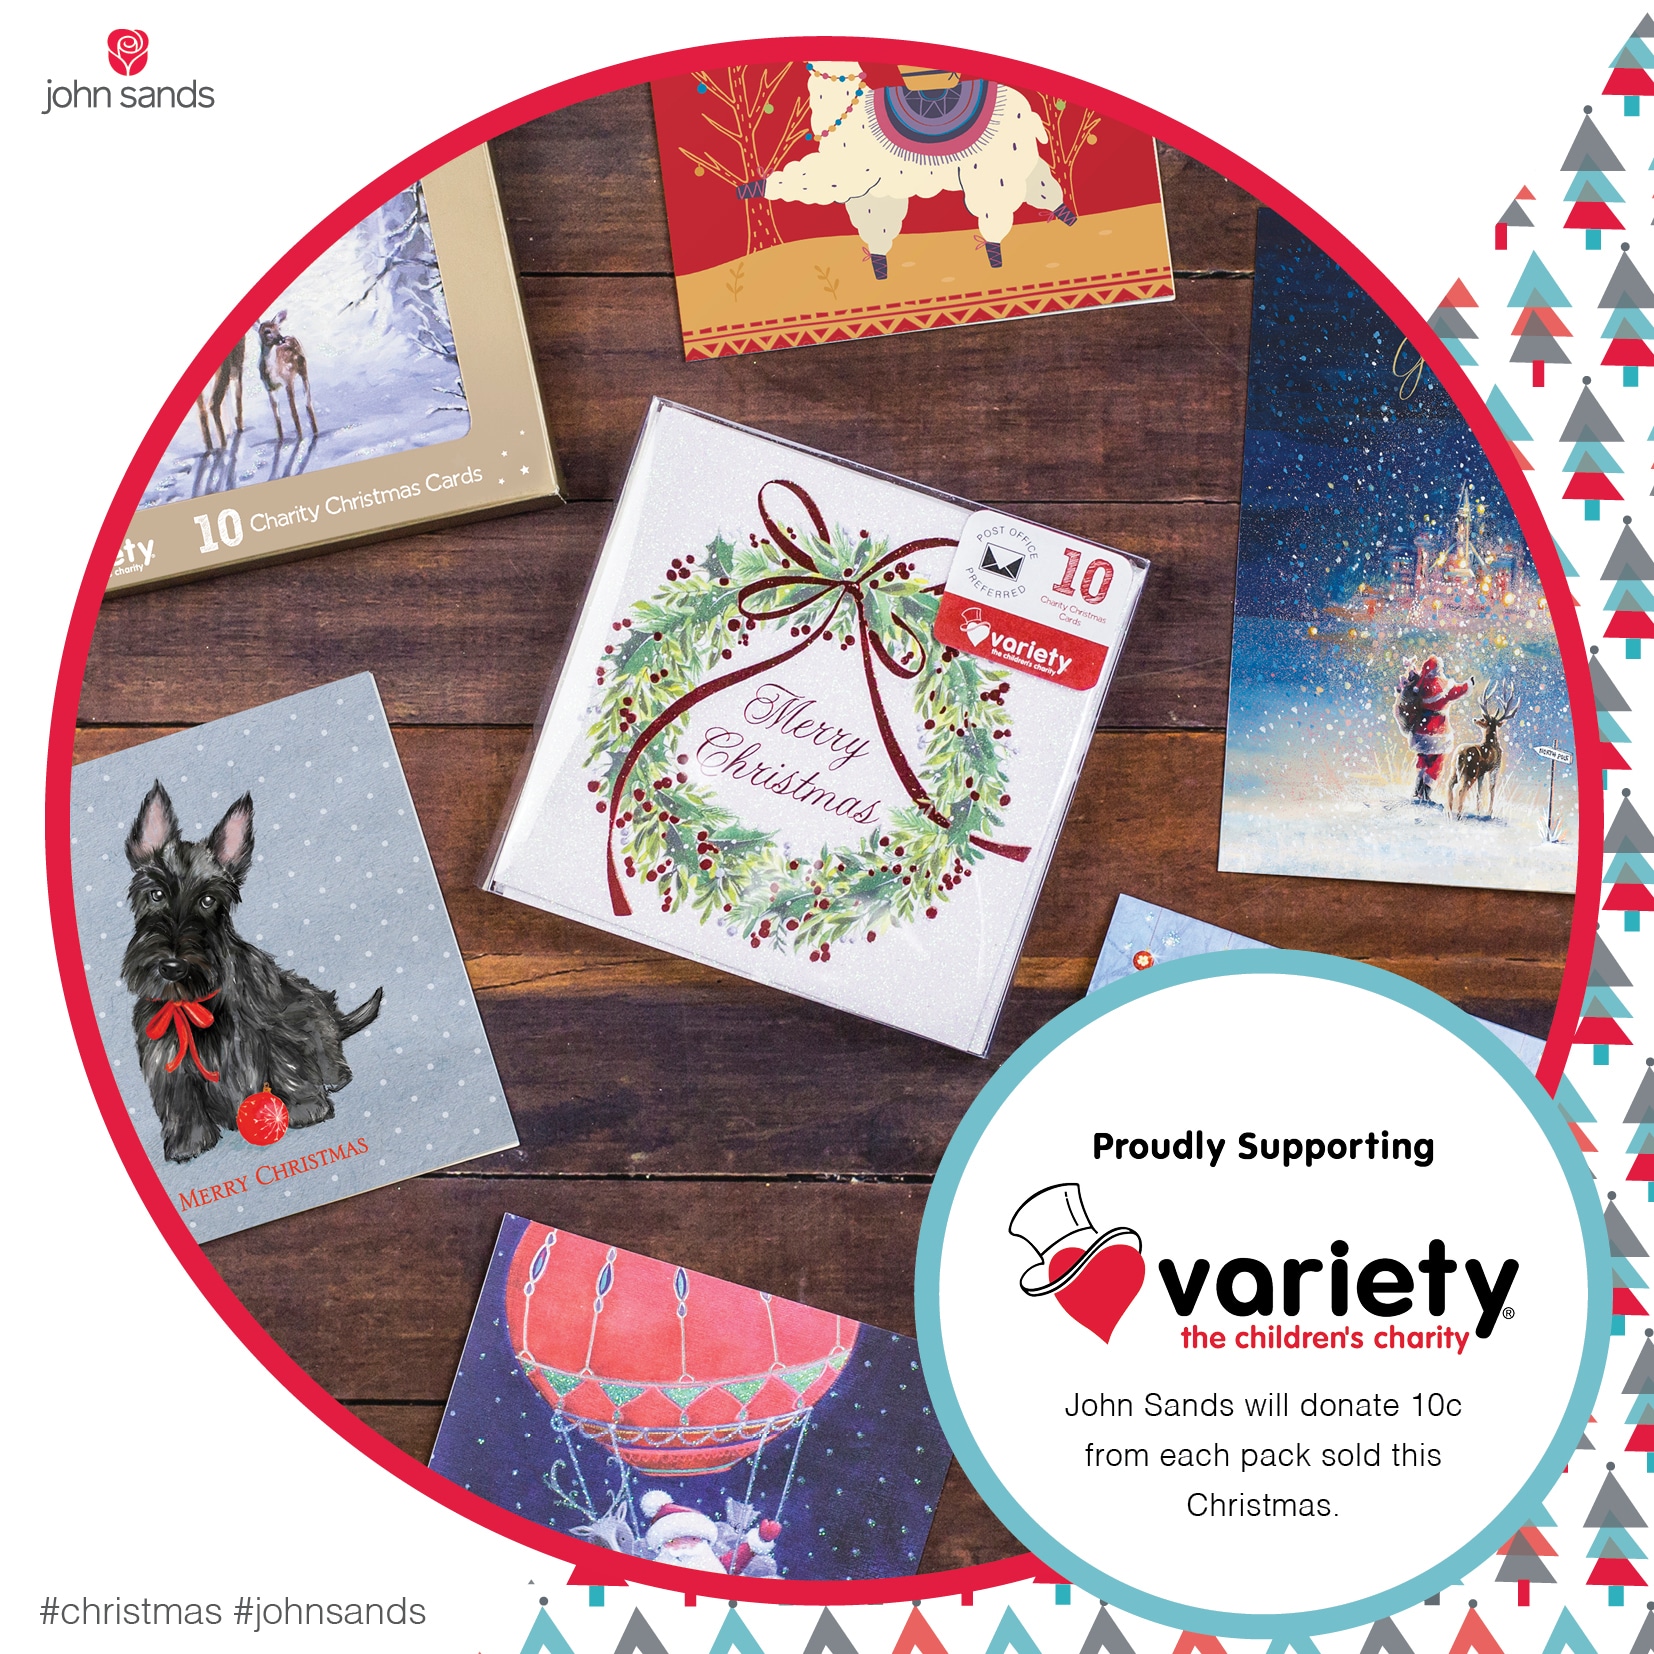 Variety – the Children’s Charity is proud to continue our partnership with John Sands to give all kids a fair go through a series of boxed Christmas cards.